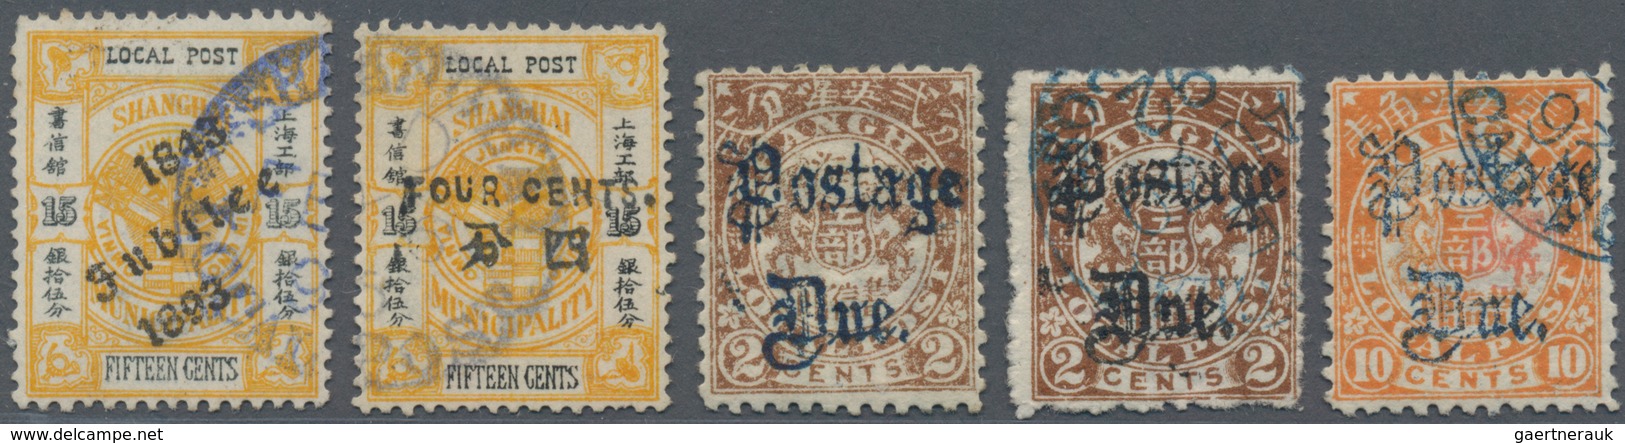 China - Shanghai: 1865/97, mint and used collection, several in both conditions, mounted on Lindner